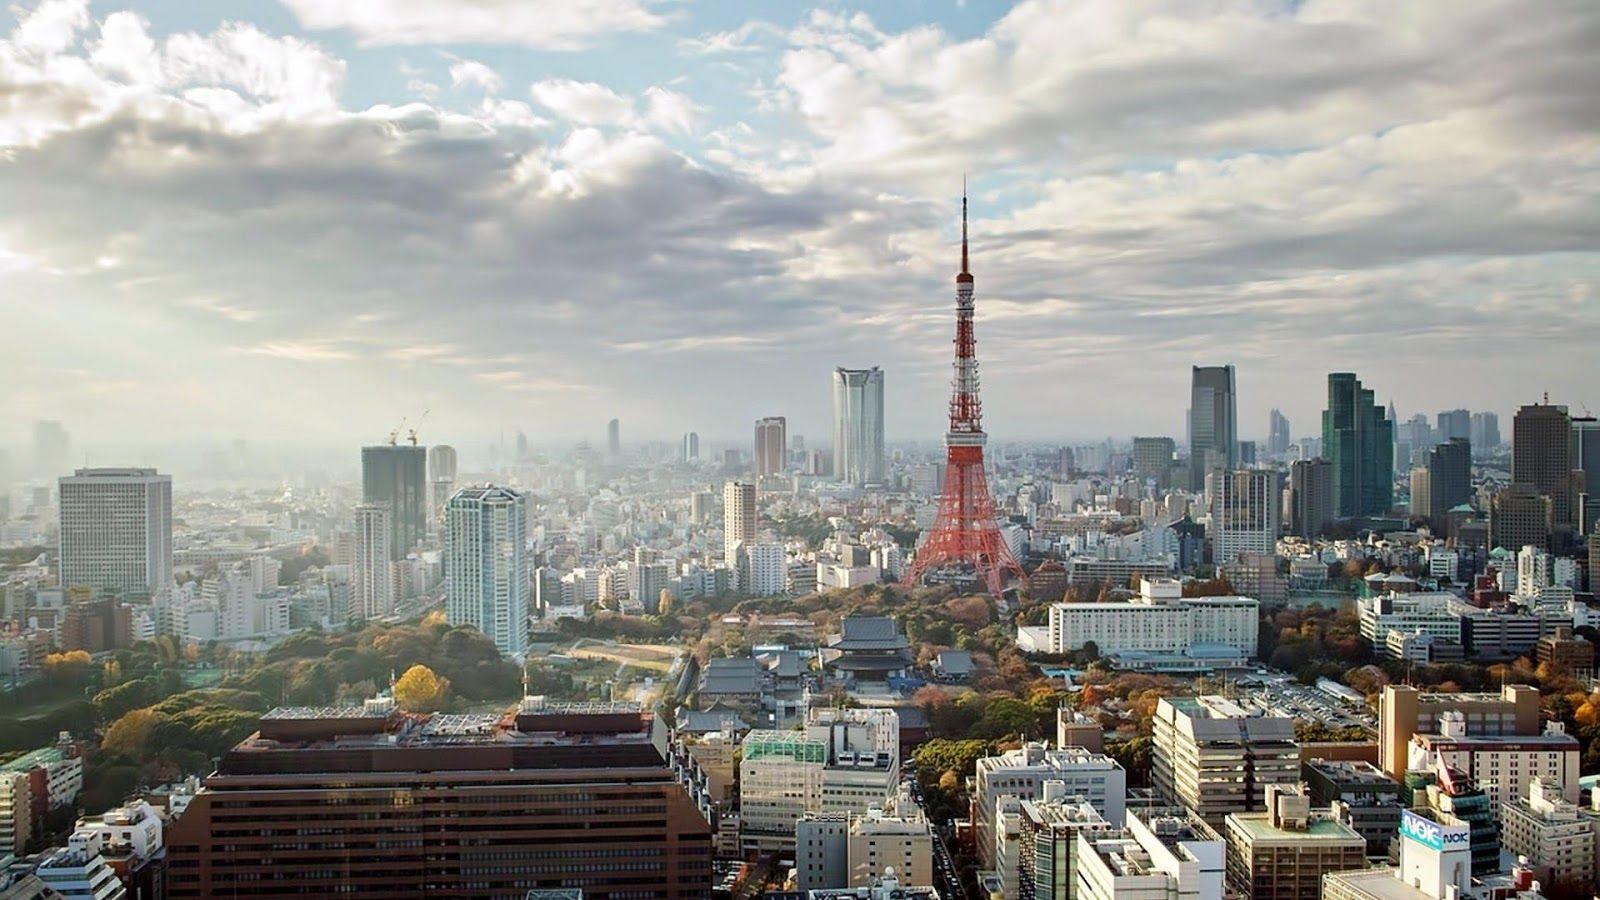 Tokyo Tower Android 4K Ultra HD Wallpaper Free Download